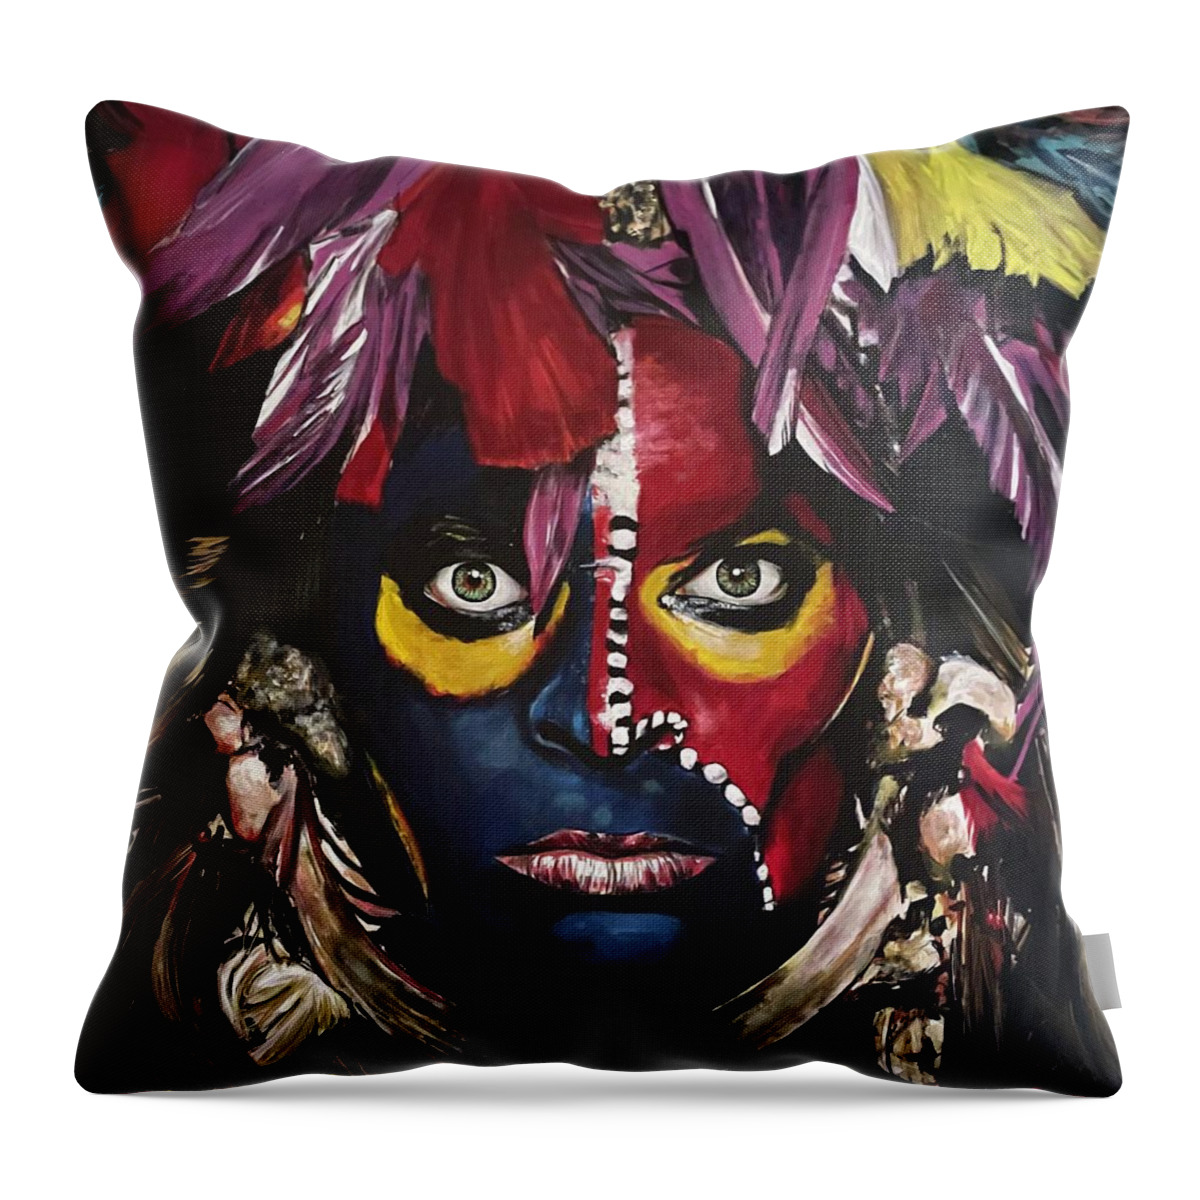 Portrait Throw Pillow featuring the painting Eat Em And Smile by Joel Tesch